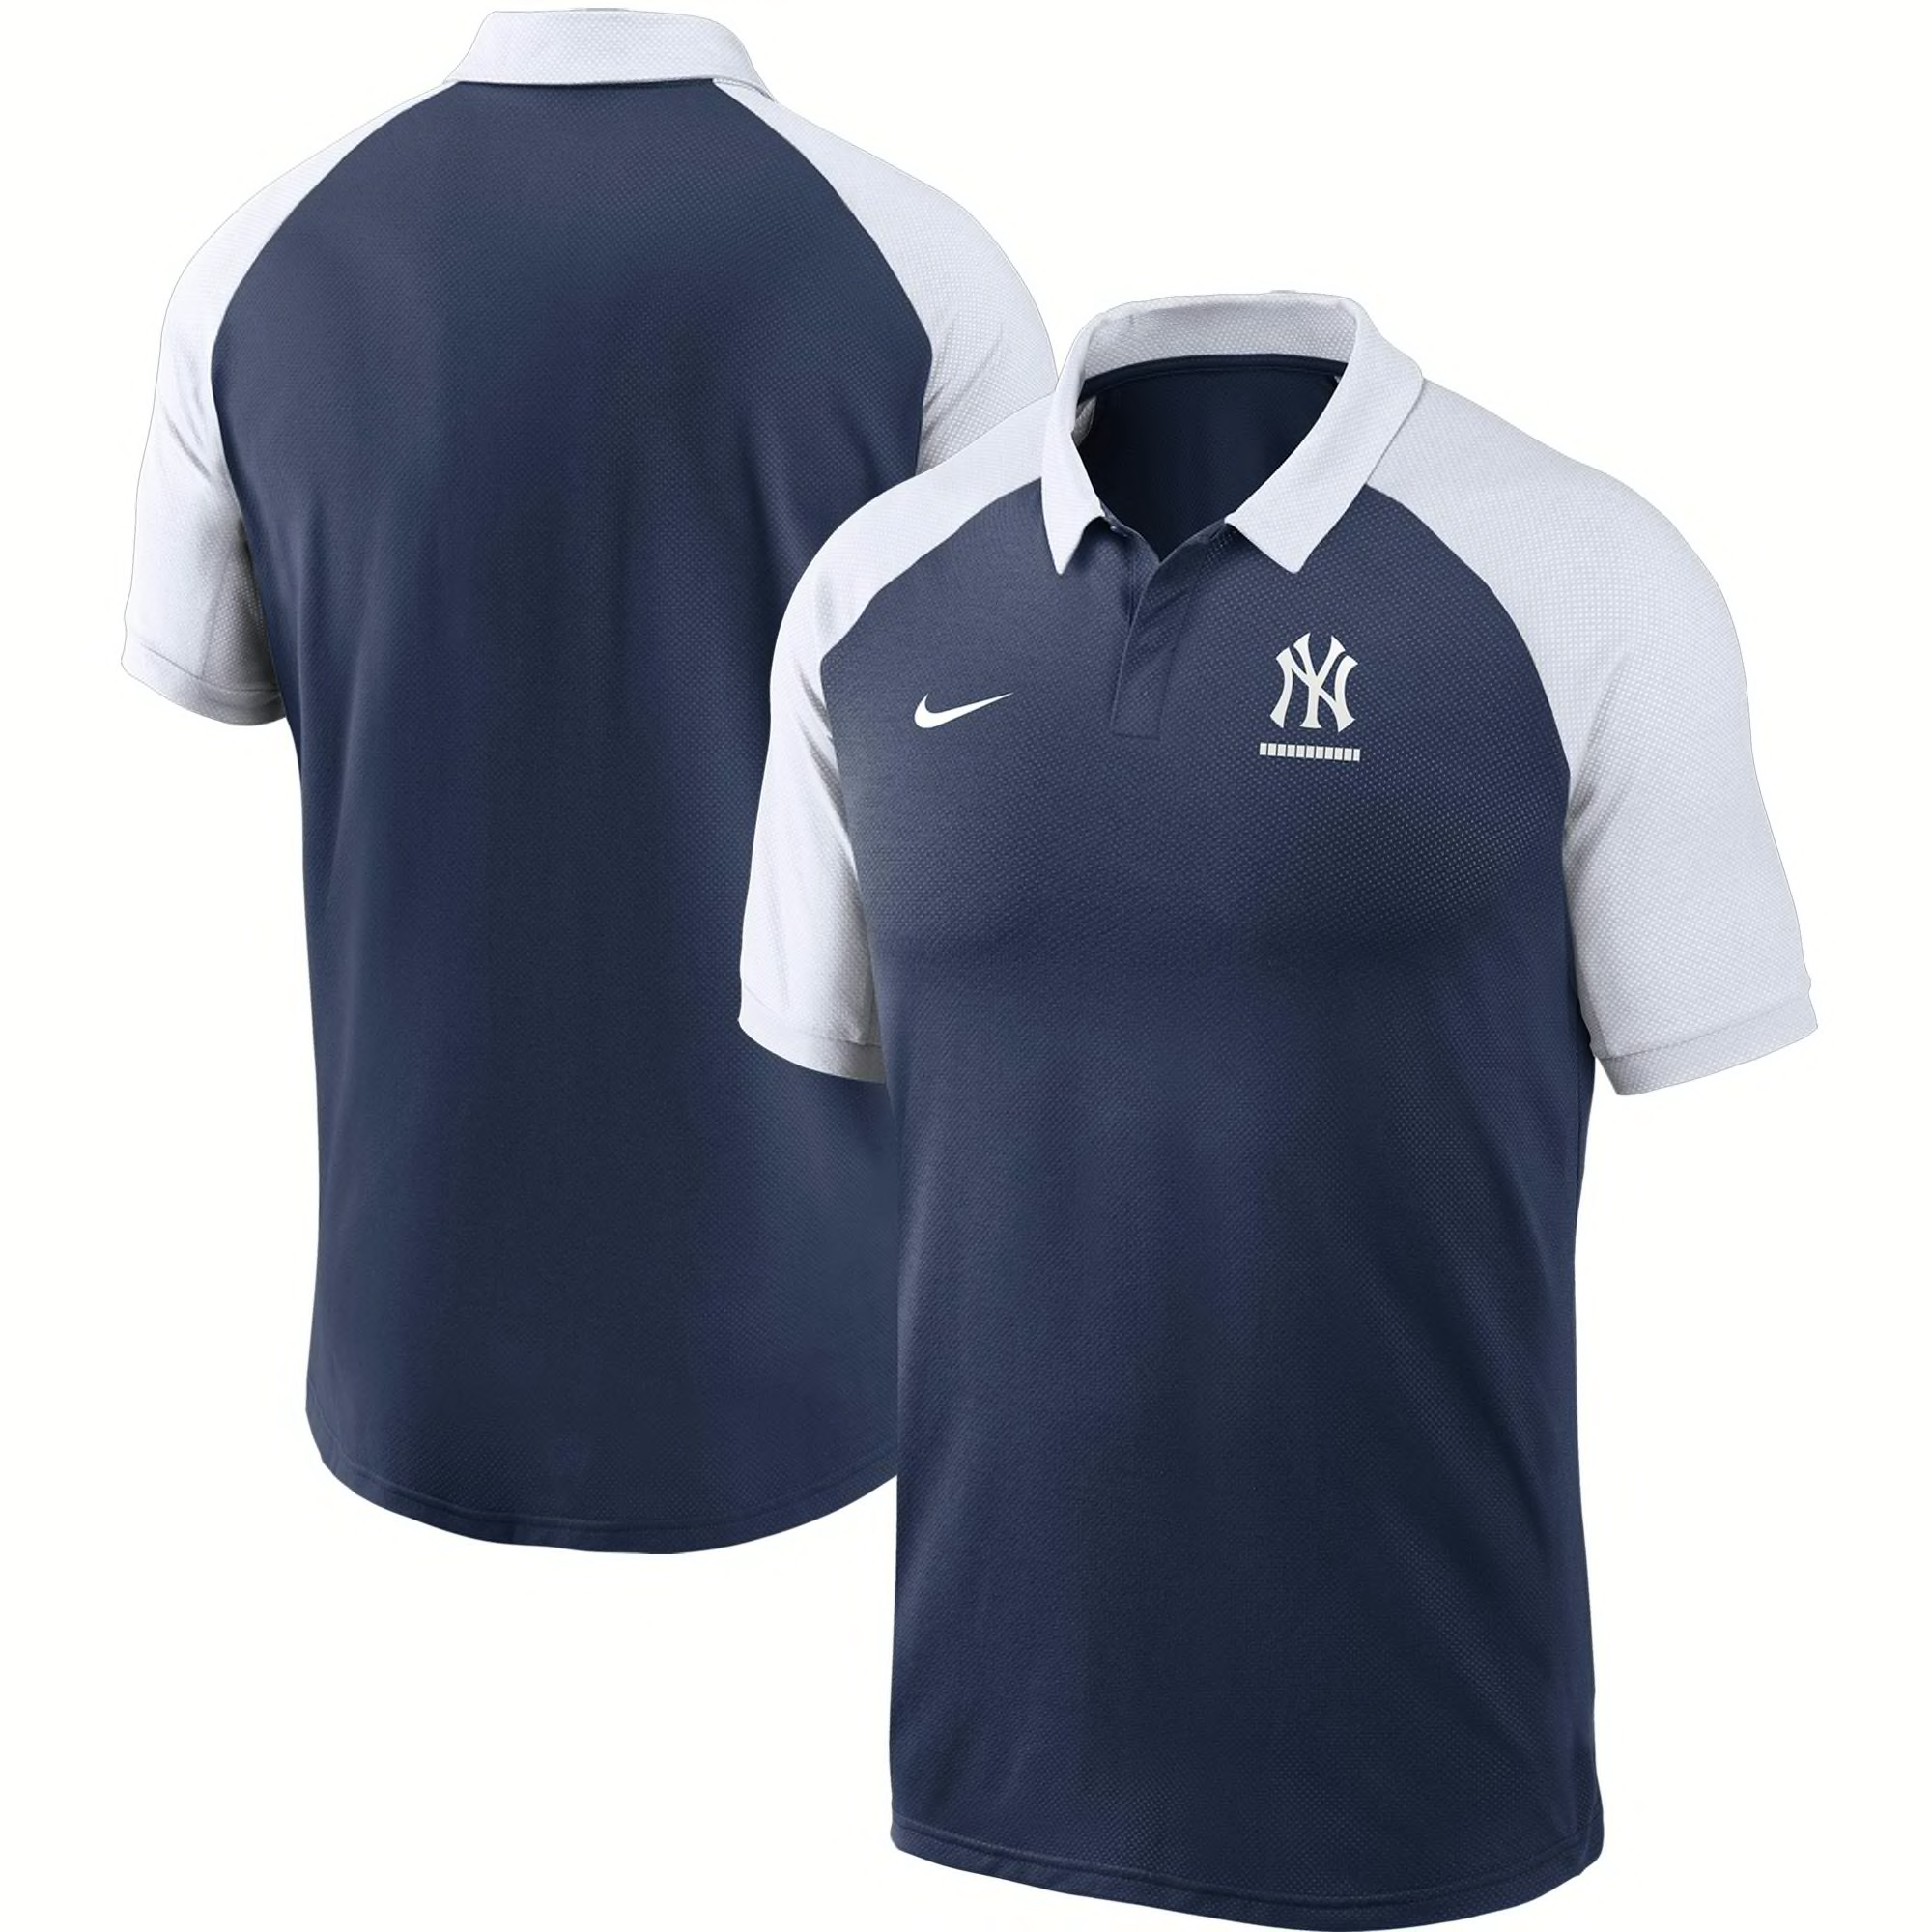 yankees father's day jersey